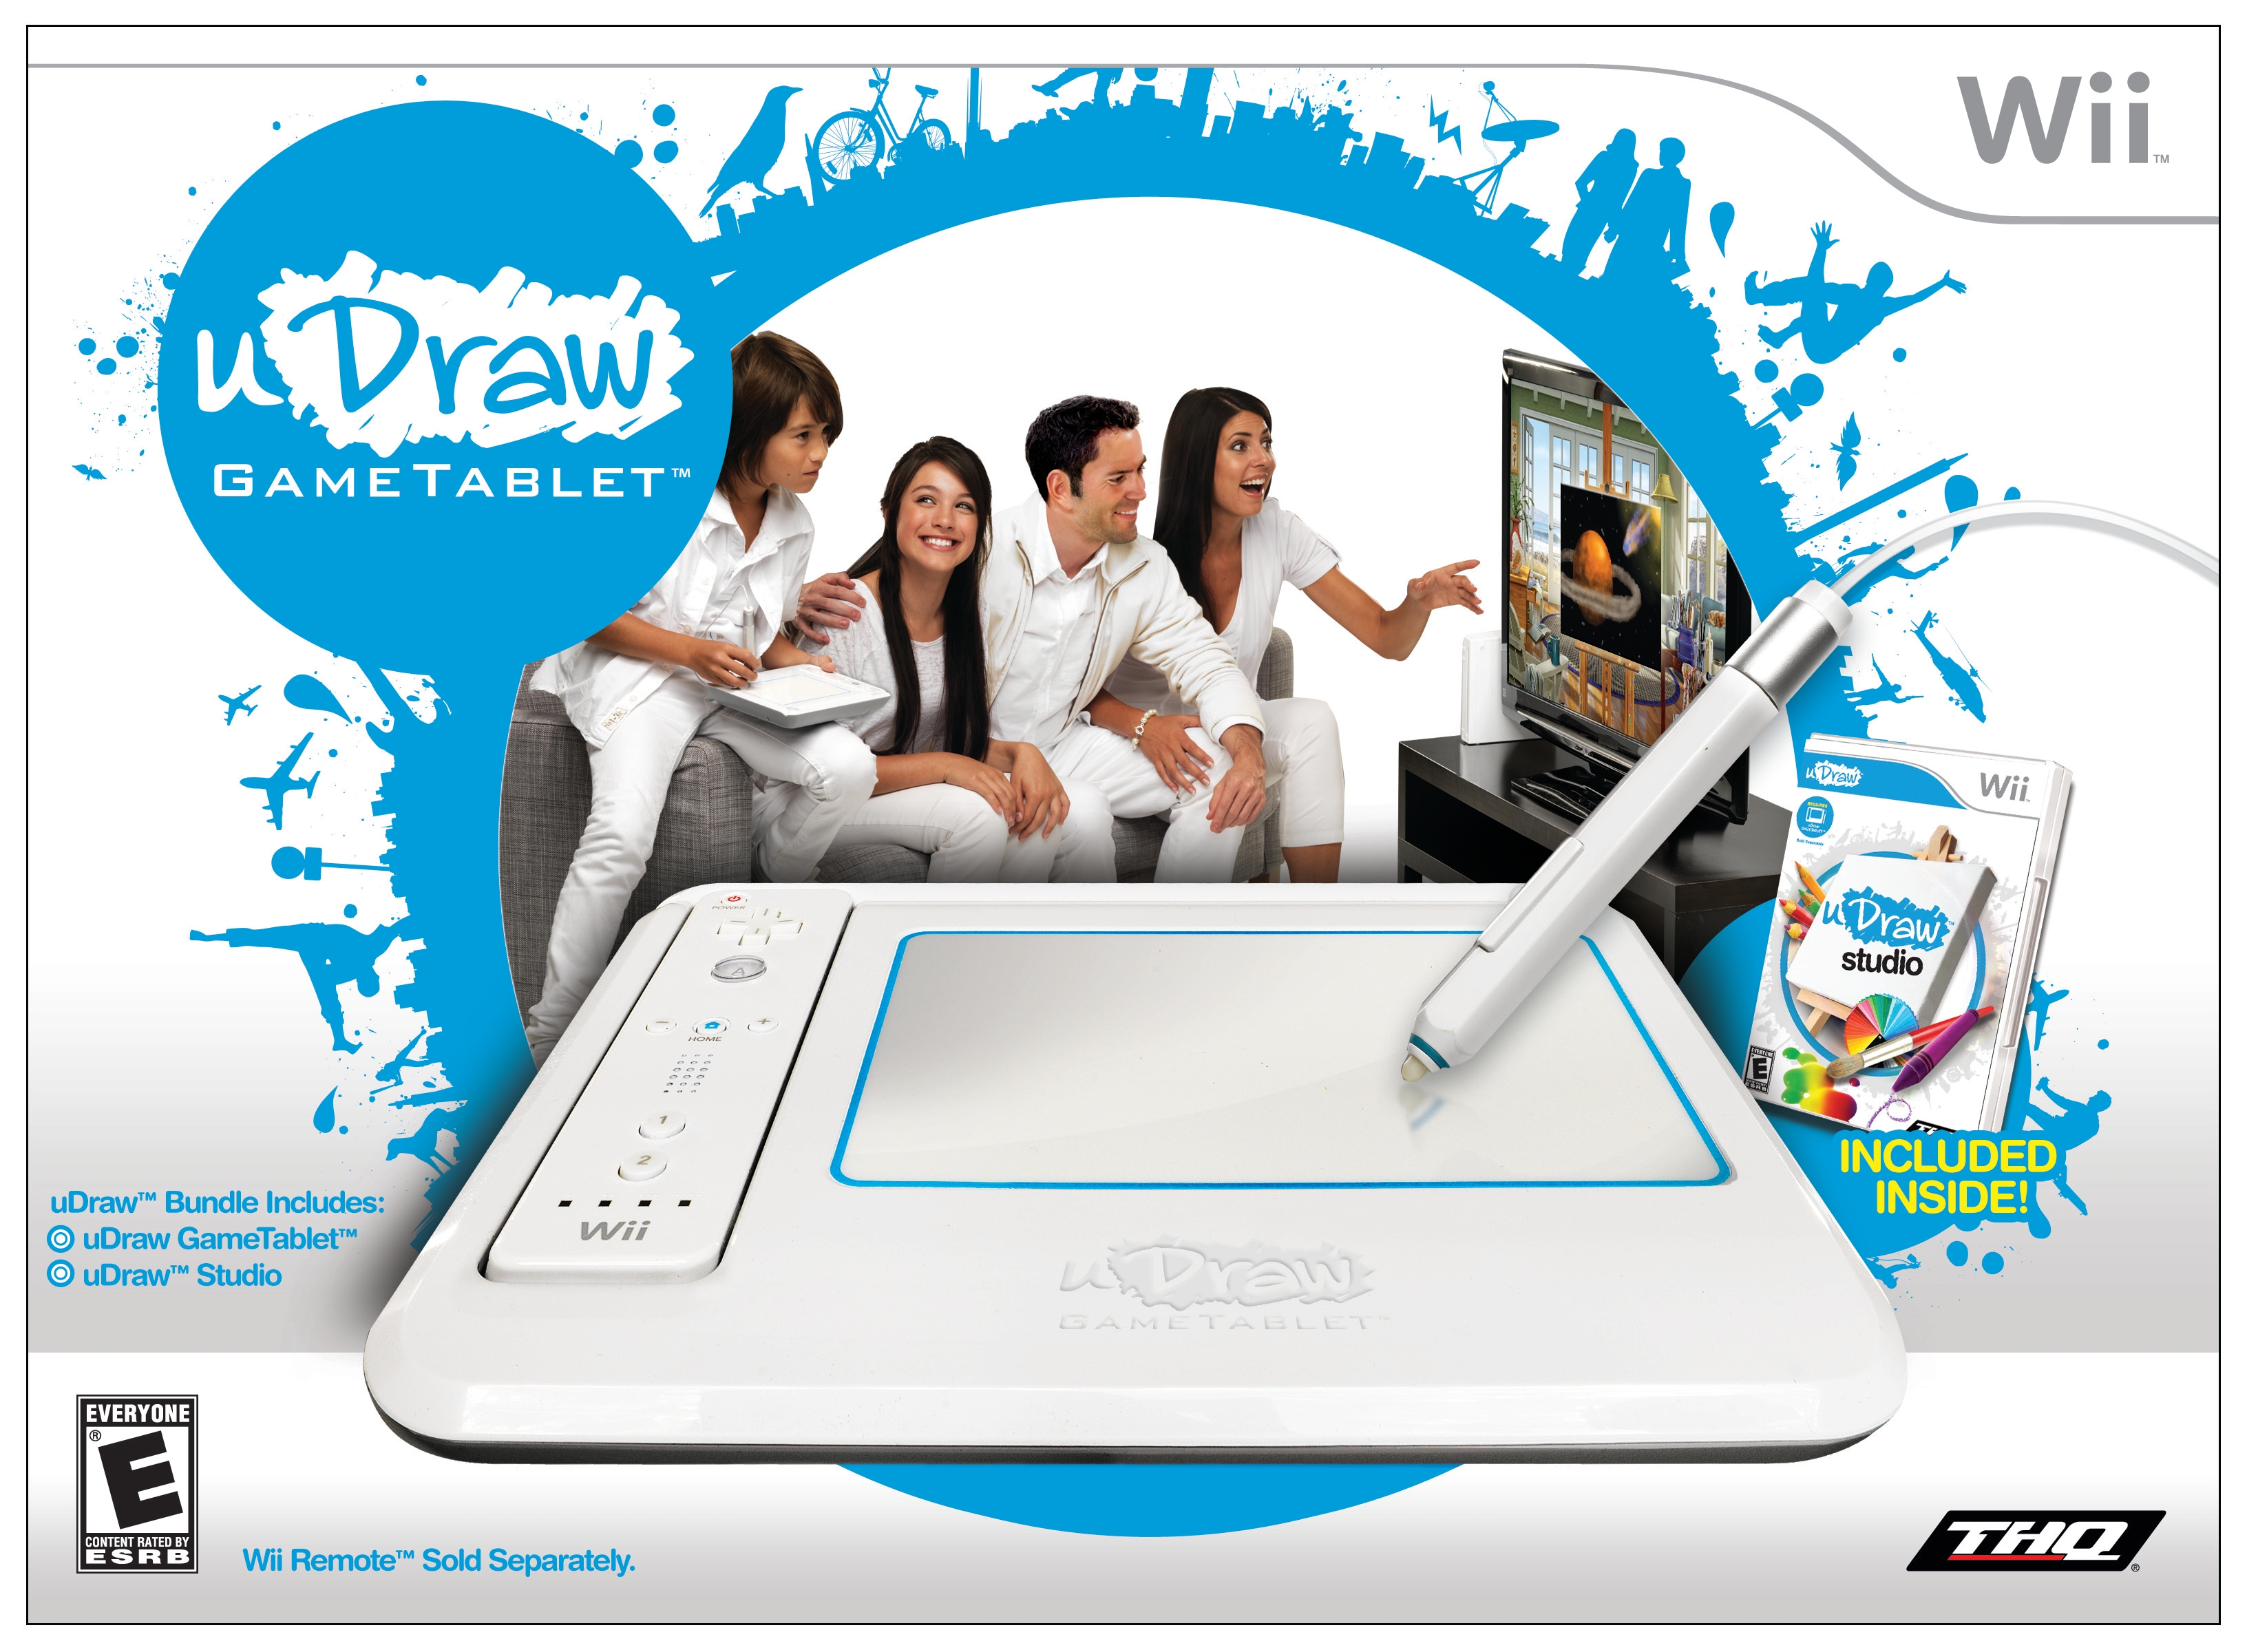 THQ Announces UDraw GameTablet Hitting Store Shelves November 14th